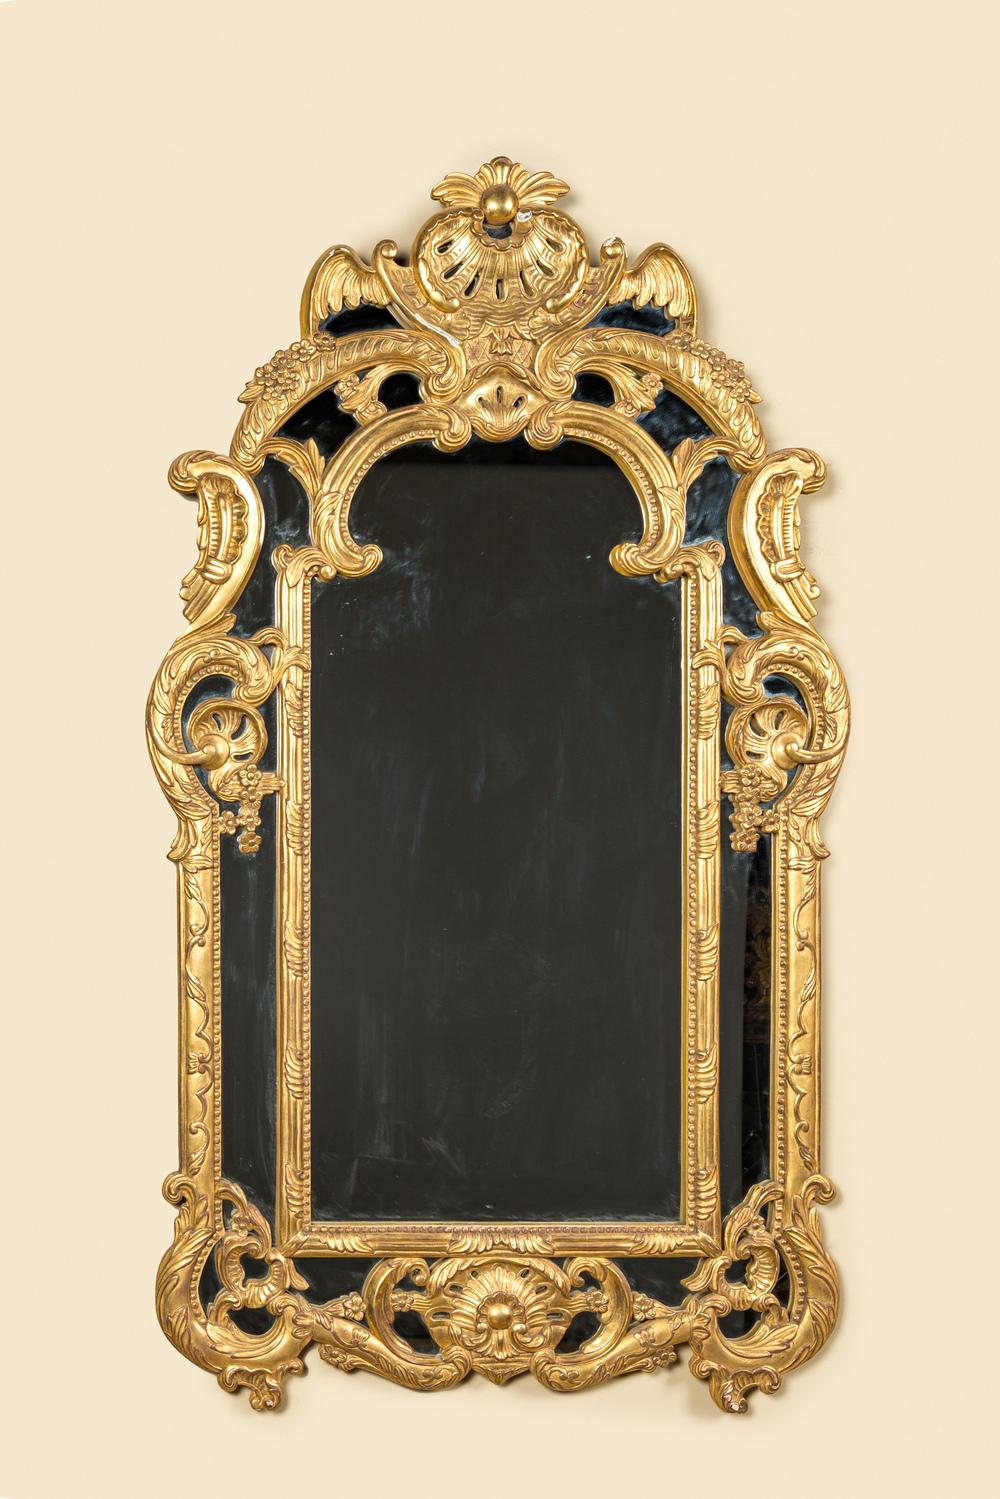 A French carved and gilt wooden mirror, 19th C.